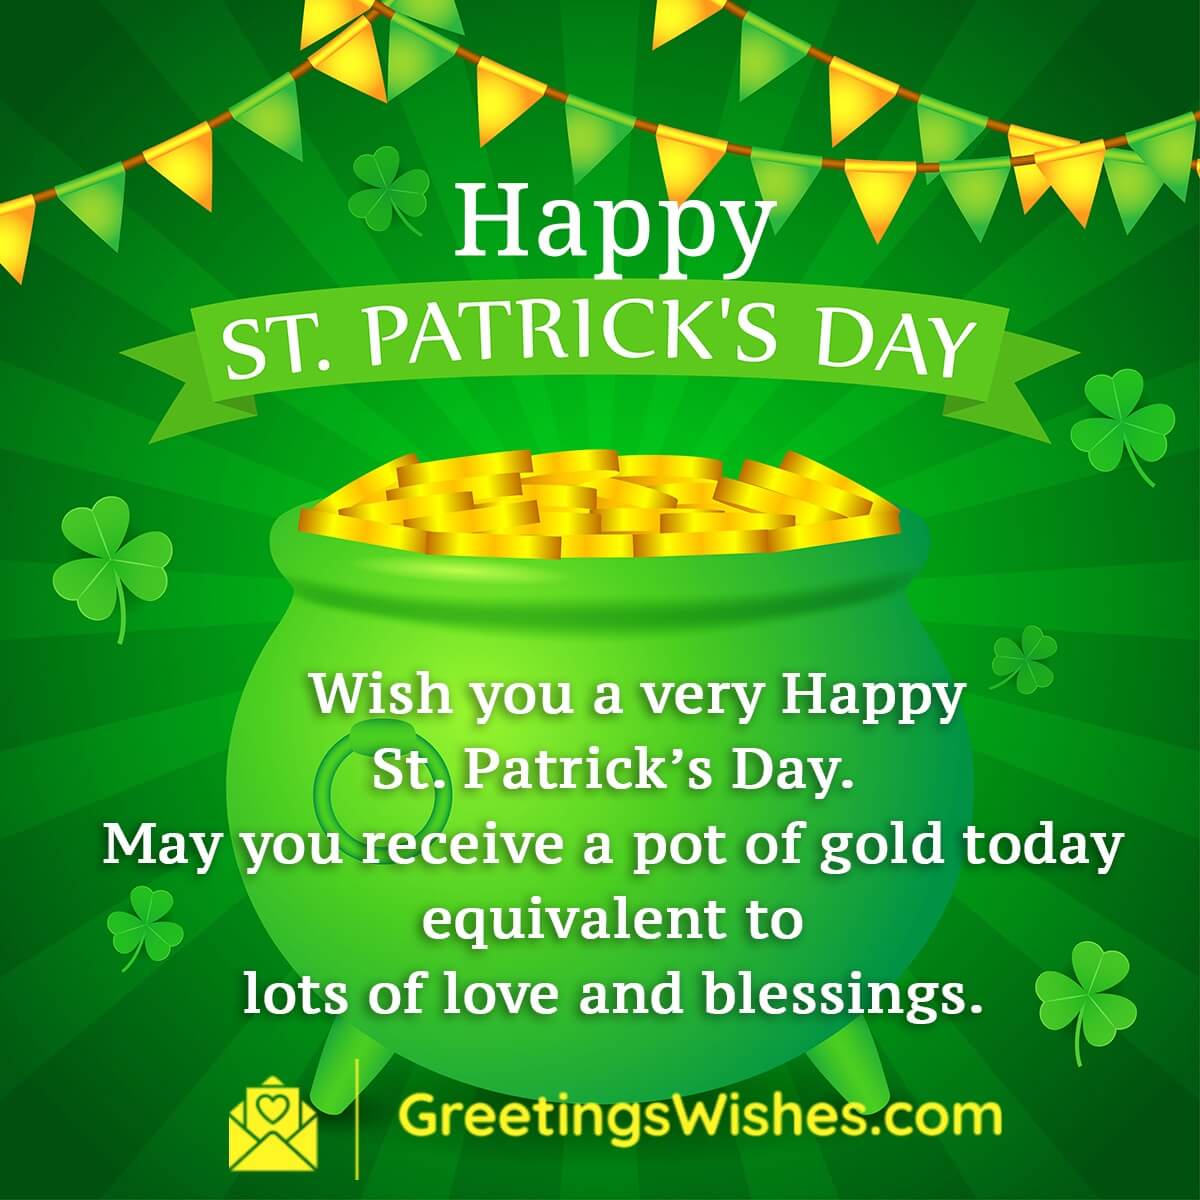 Happy St. Patrick’s Day Wishes